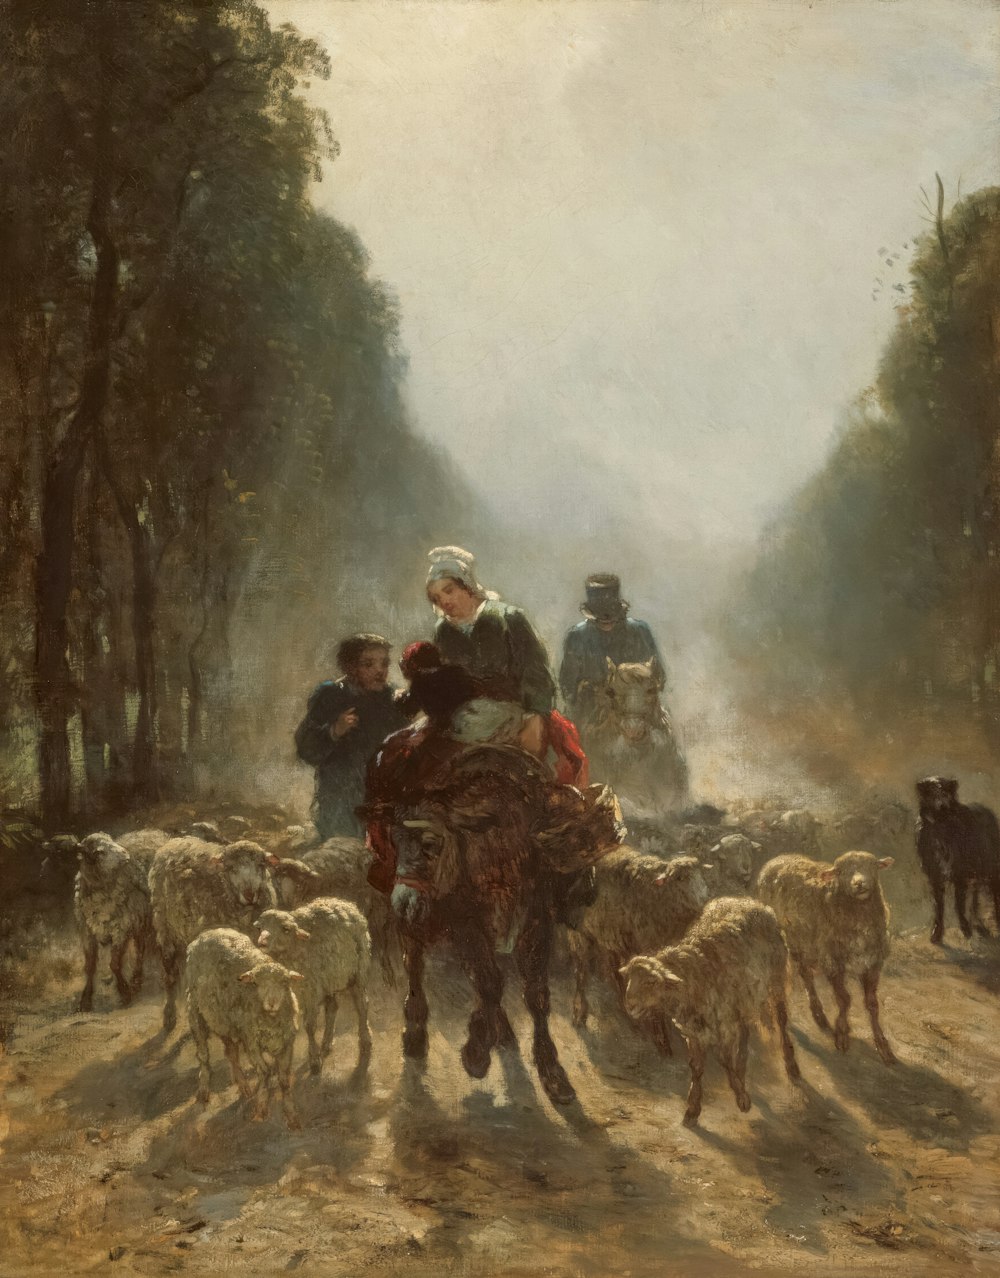 a painting of a group of people riding on the back of a horse